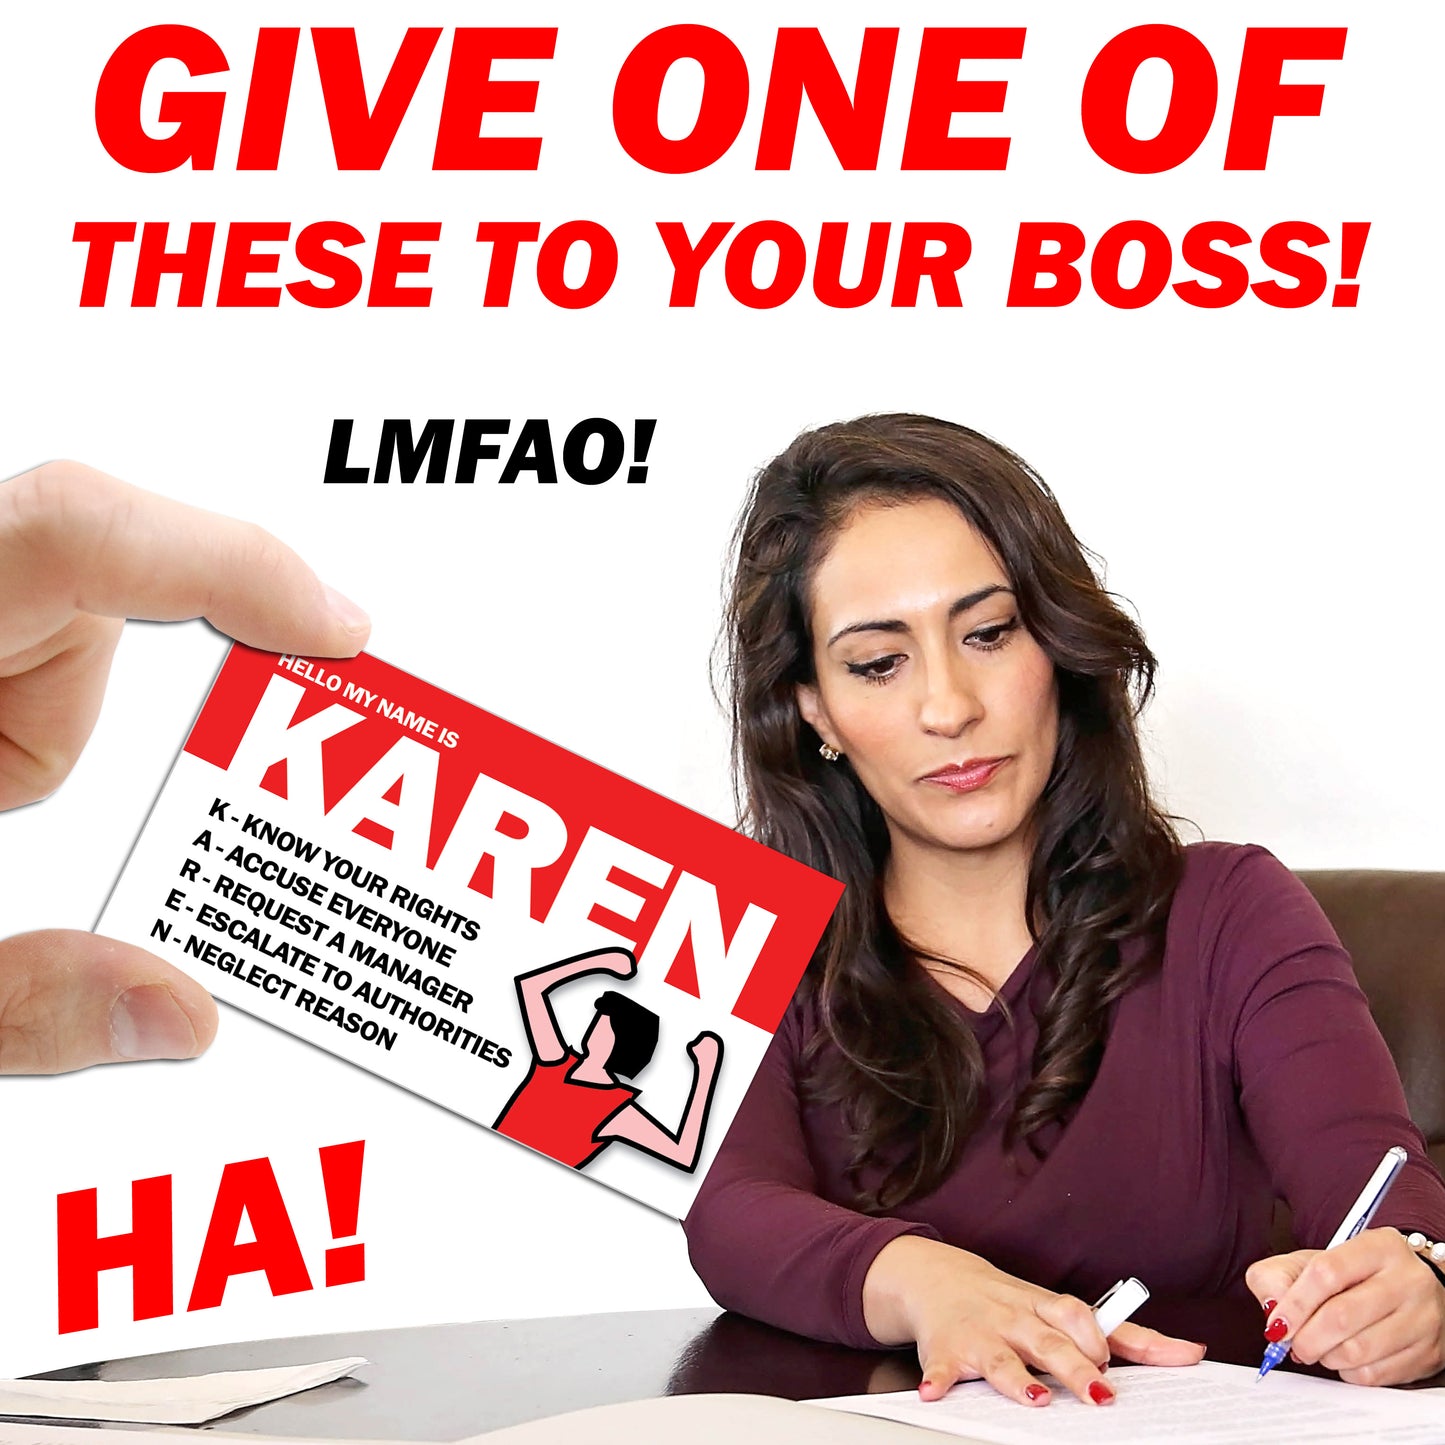 Hello My Name is Karen Cards – 50 Qty Business Cards, Great Graphics on the Front, Blank Back, High Gloss, High Quality, Great Fun & Laughs!